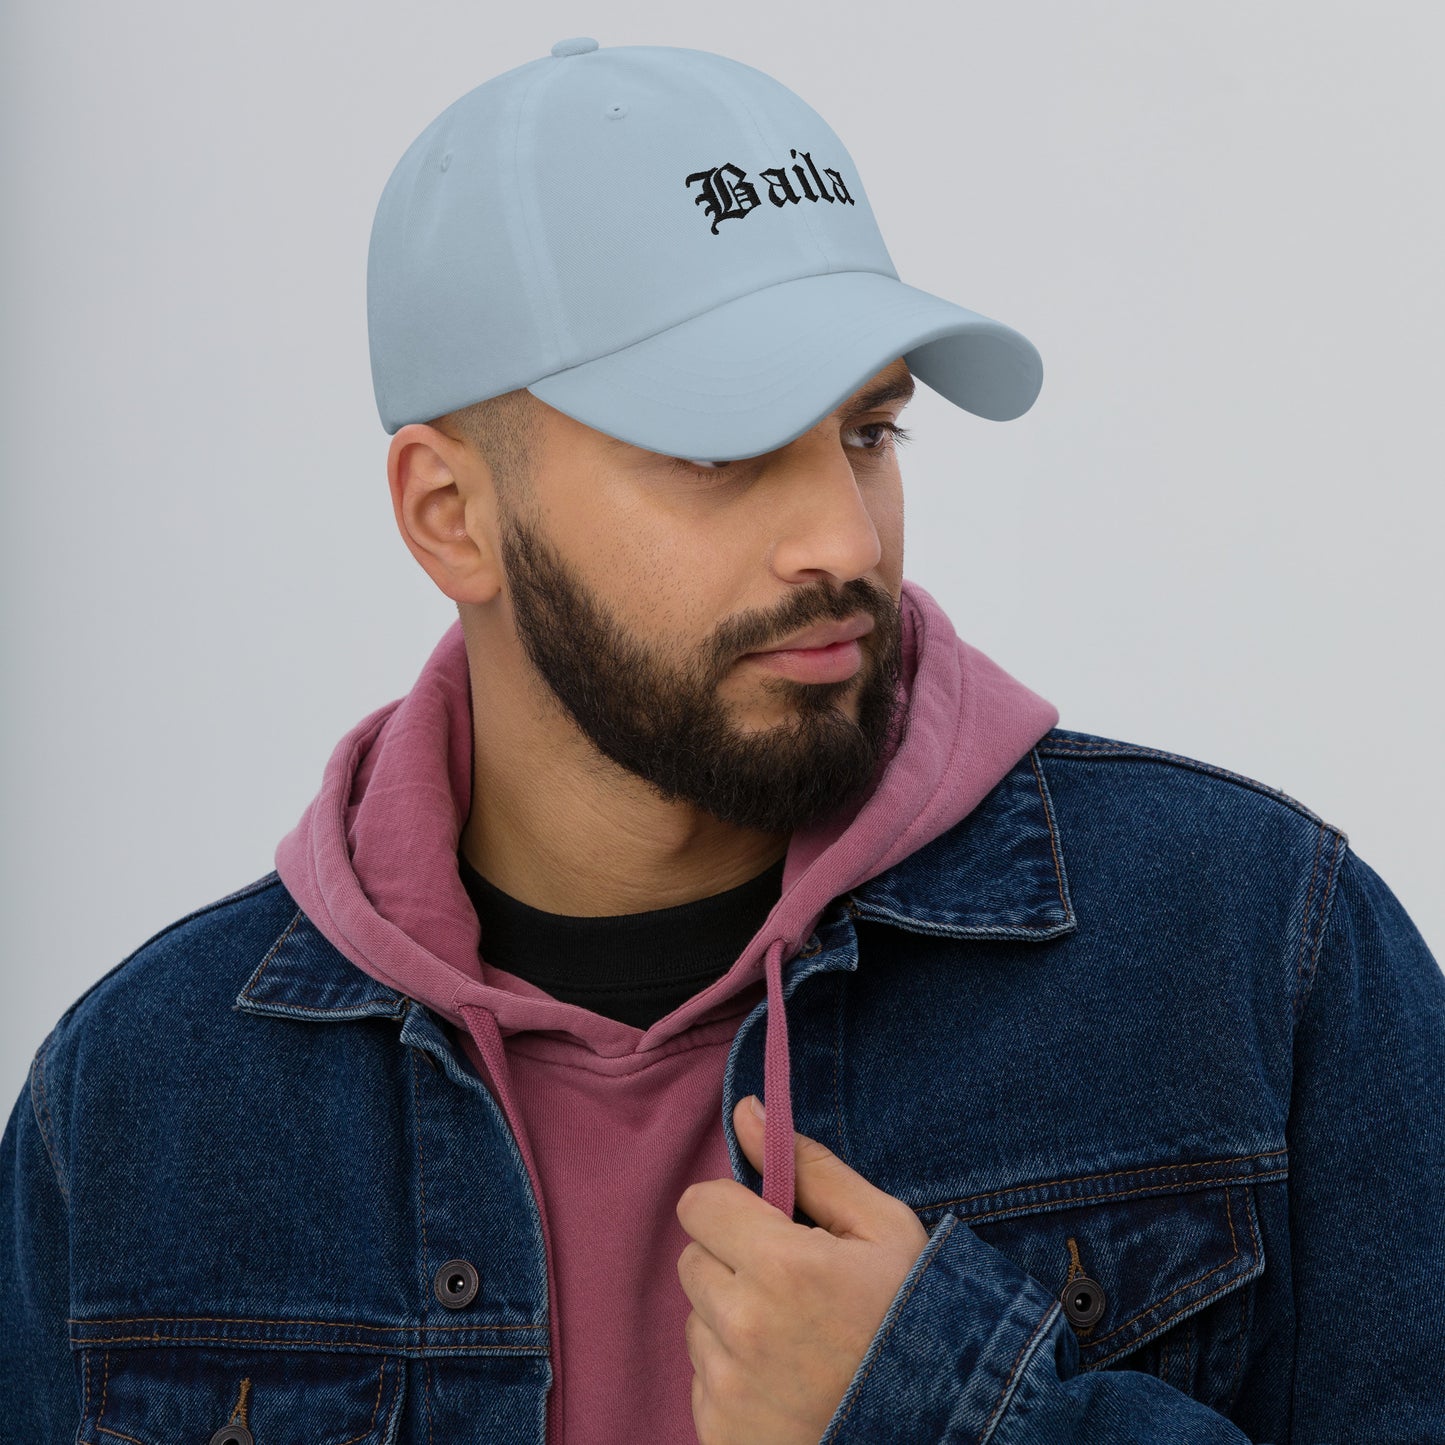 Baila embroidered Dad hat